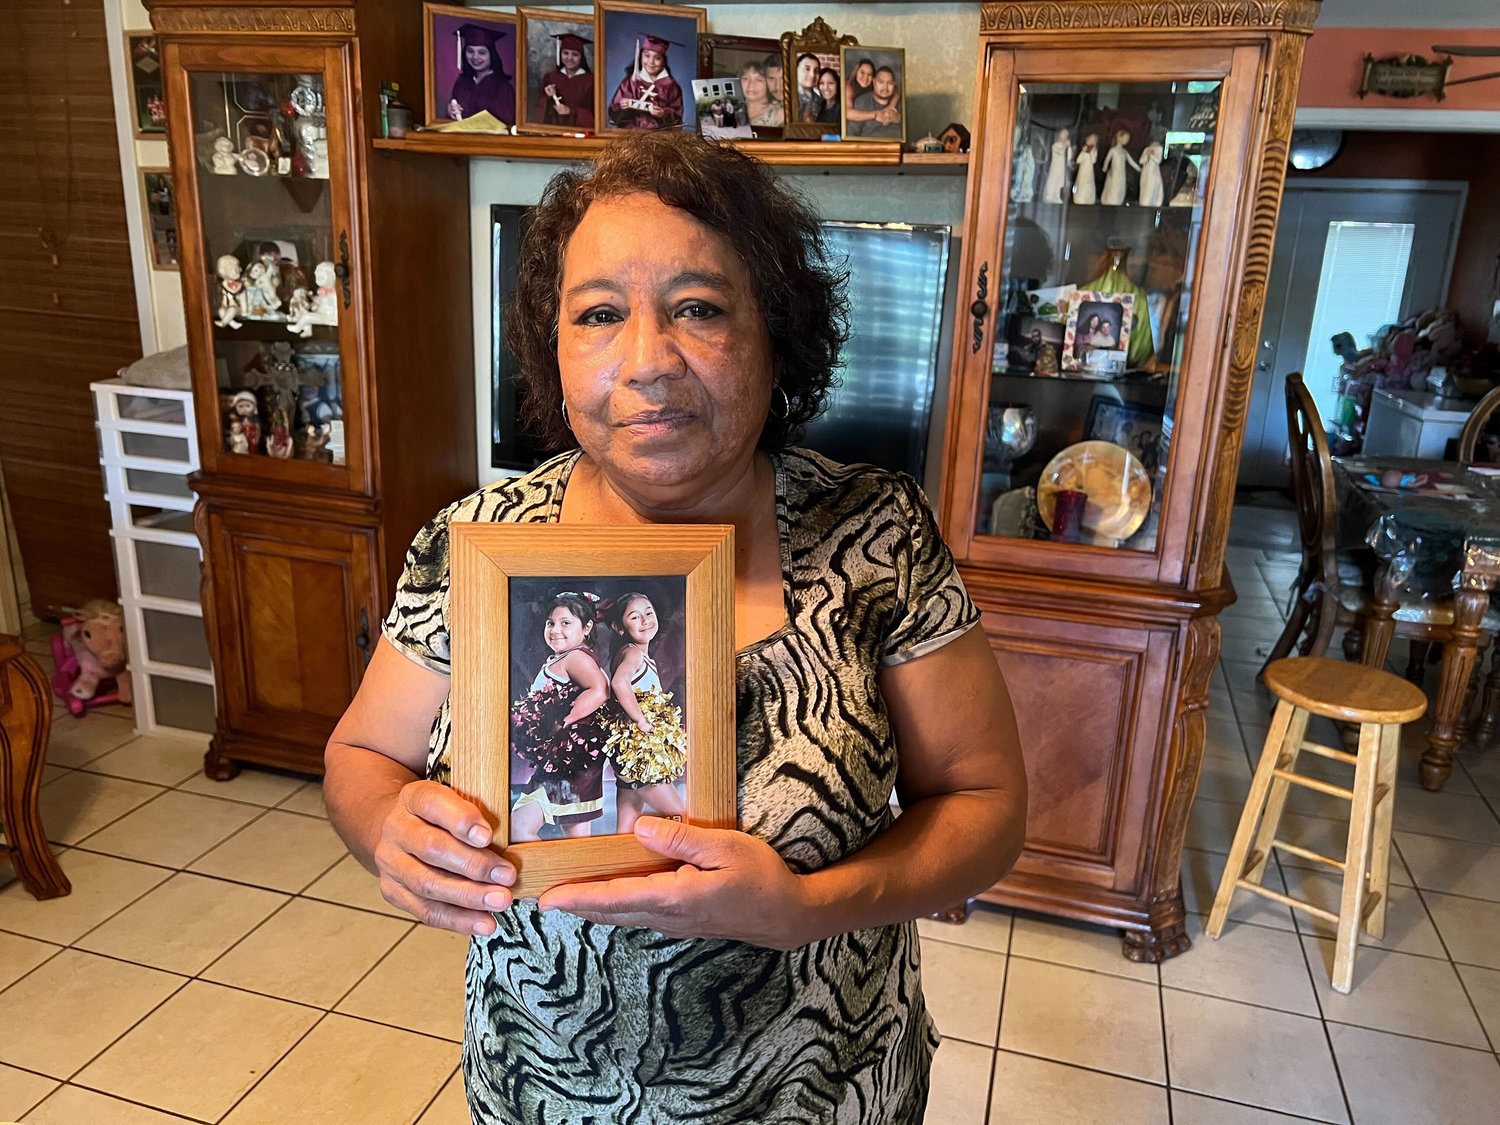 Nelda Lugo, 63, holds a photo of her, granddaughters Eliana Garcia, 9, left, and Janel Garcia, 11. Eliana was killed in the school shooting at Robb Elementary School in Uvalde, Texas. (Molly Hennessey-Fiske/Los Angeles Times/TNS)